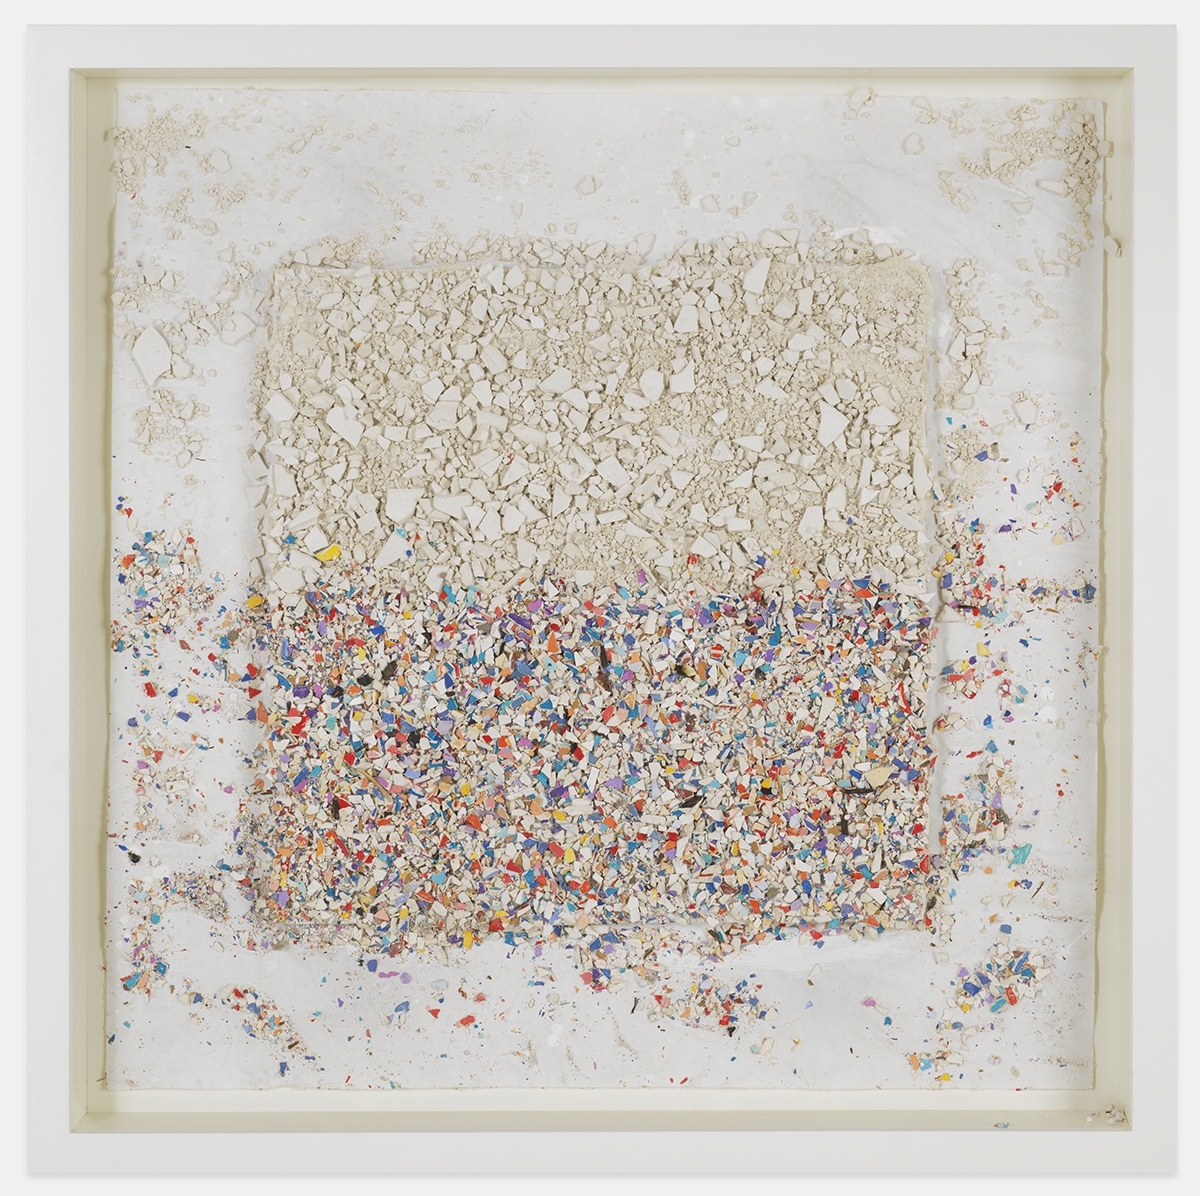 Number 327D, 2022

Plaster and paint on paper

Work: 58.4 x 58.4 x 5.1 cm / 23 x 23 x 2 in.

Frame: 66 x 66 x 7.6 cm / 26 x 26 x 3 in.

Enquire